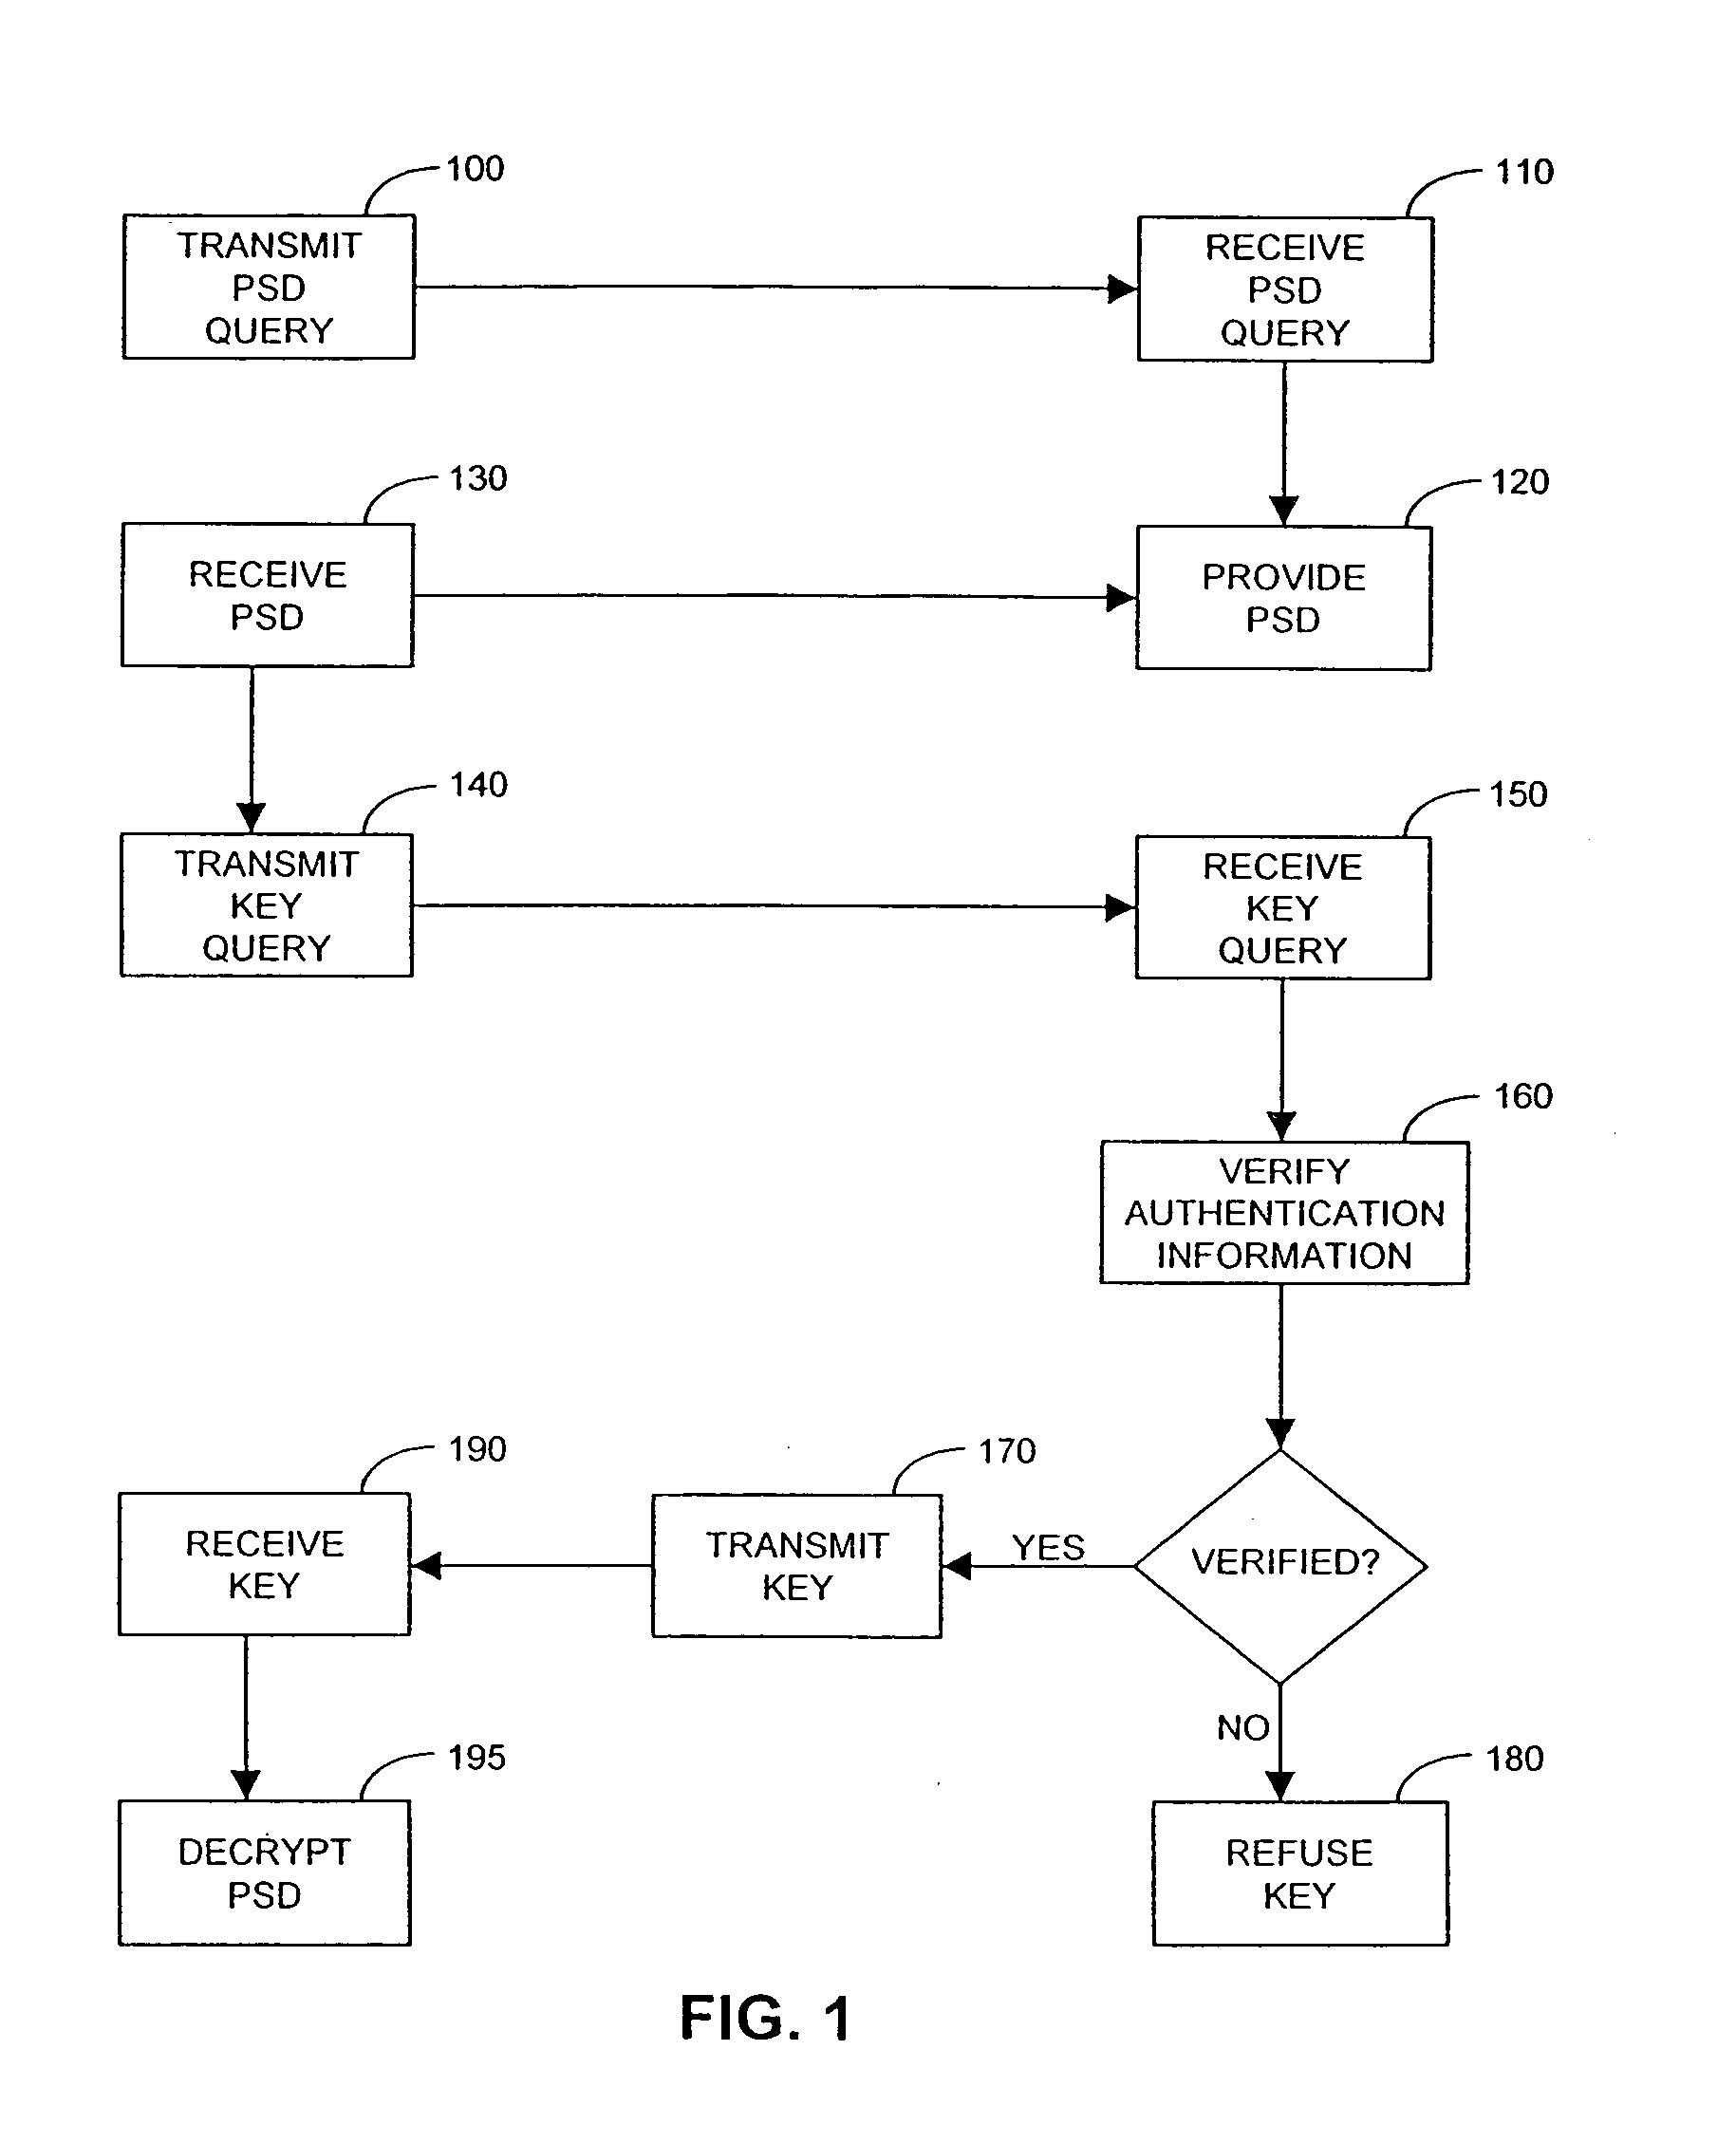 System and methods for maintaining and distributing personal security devices